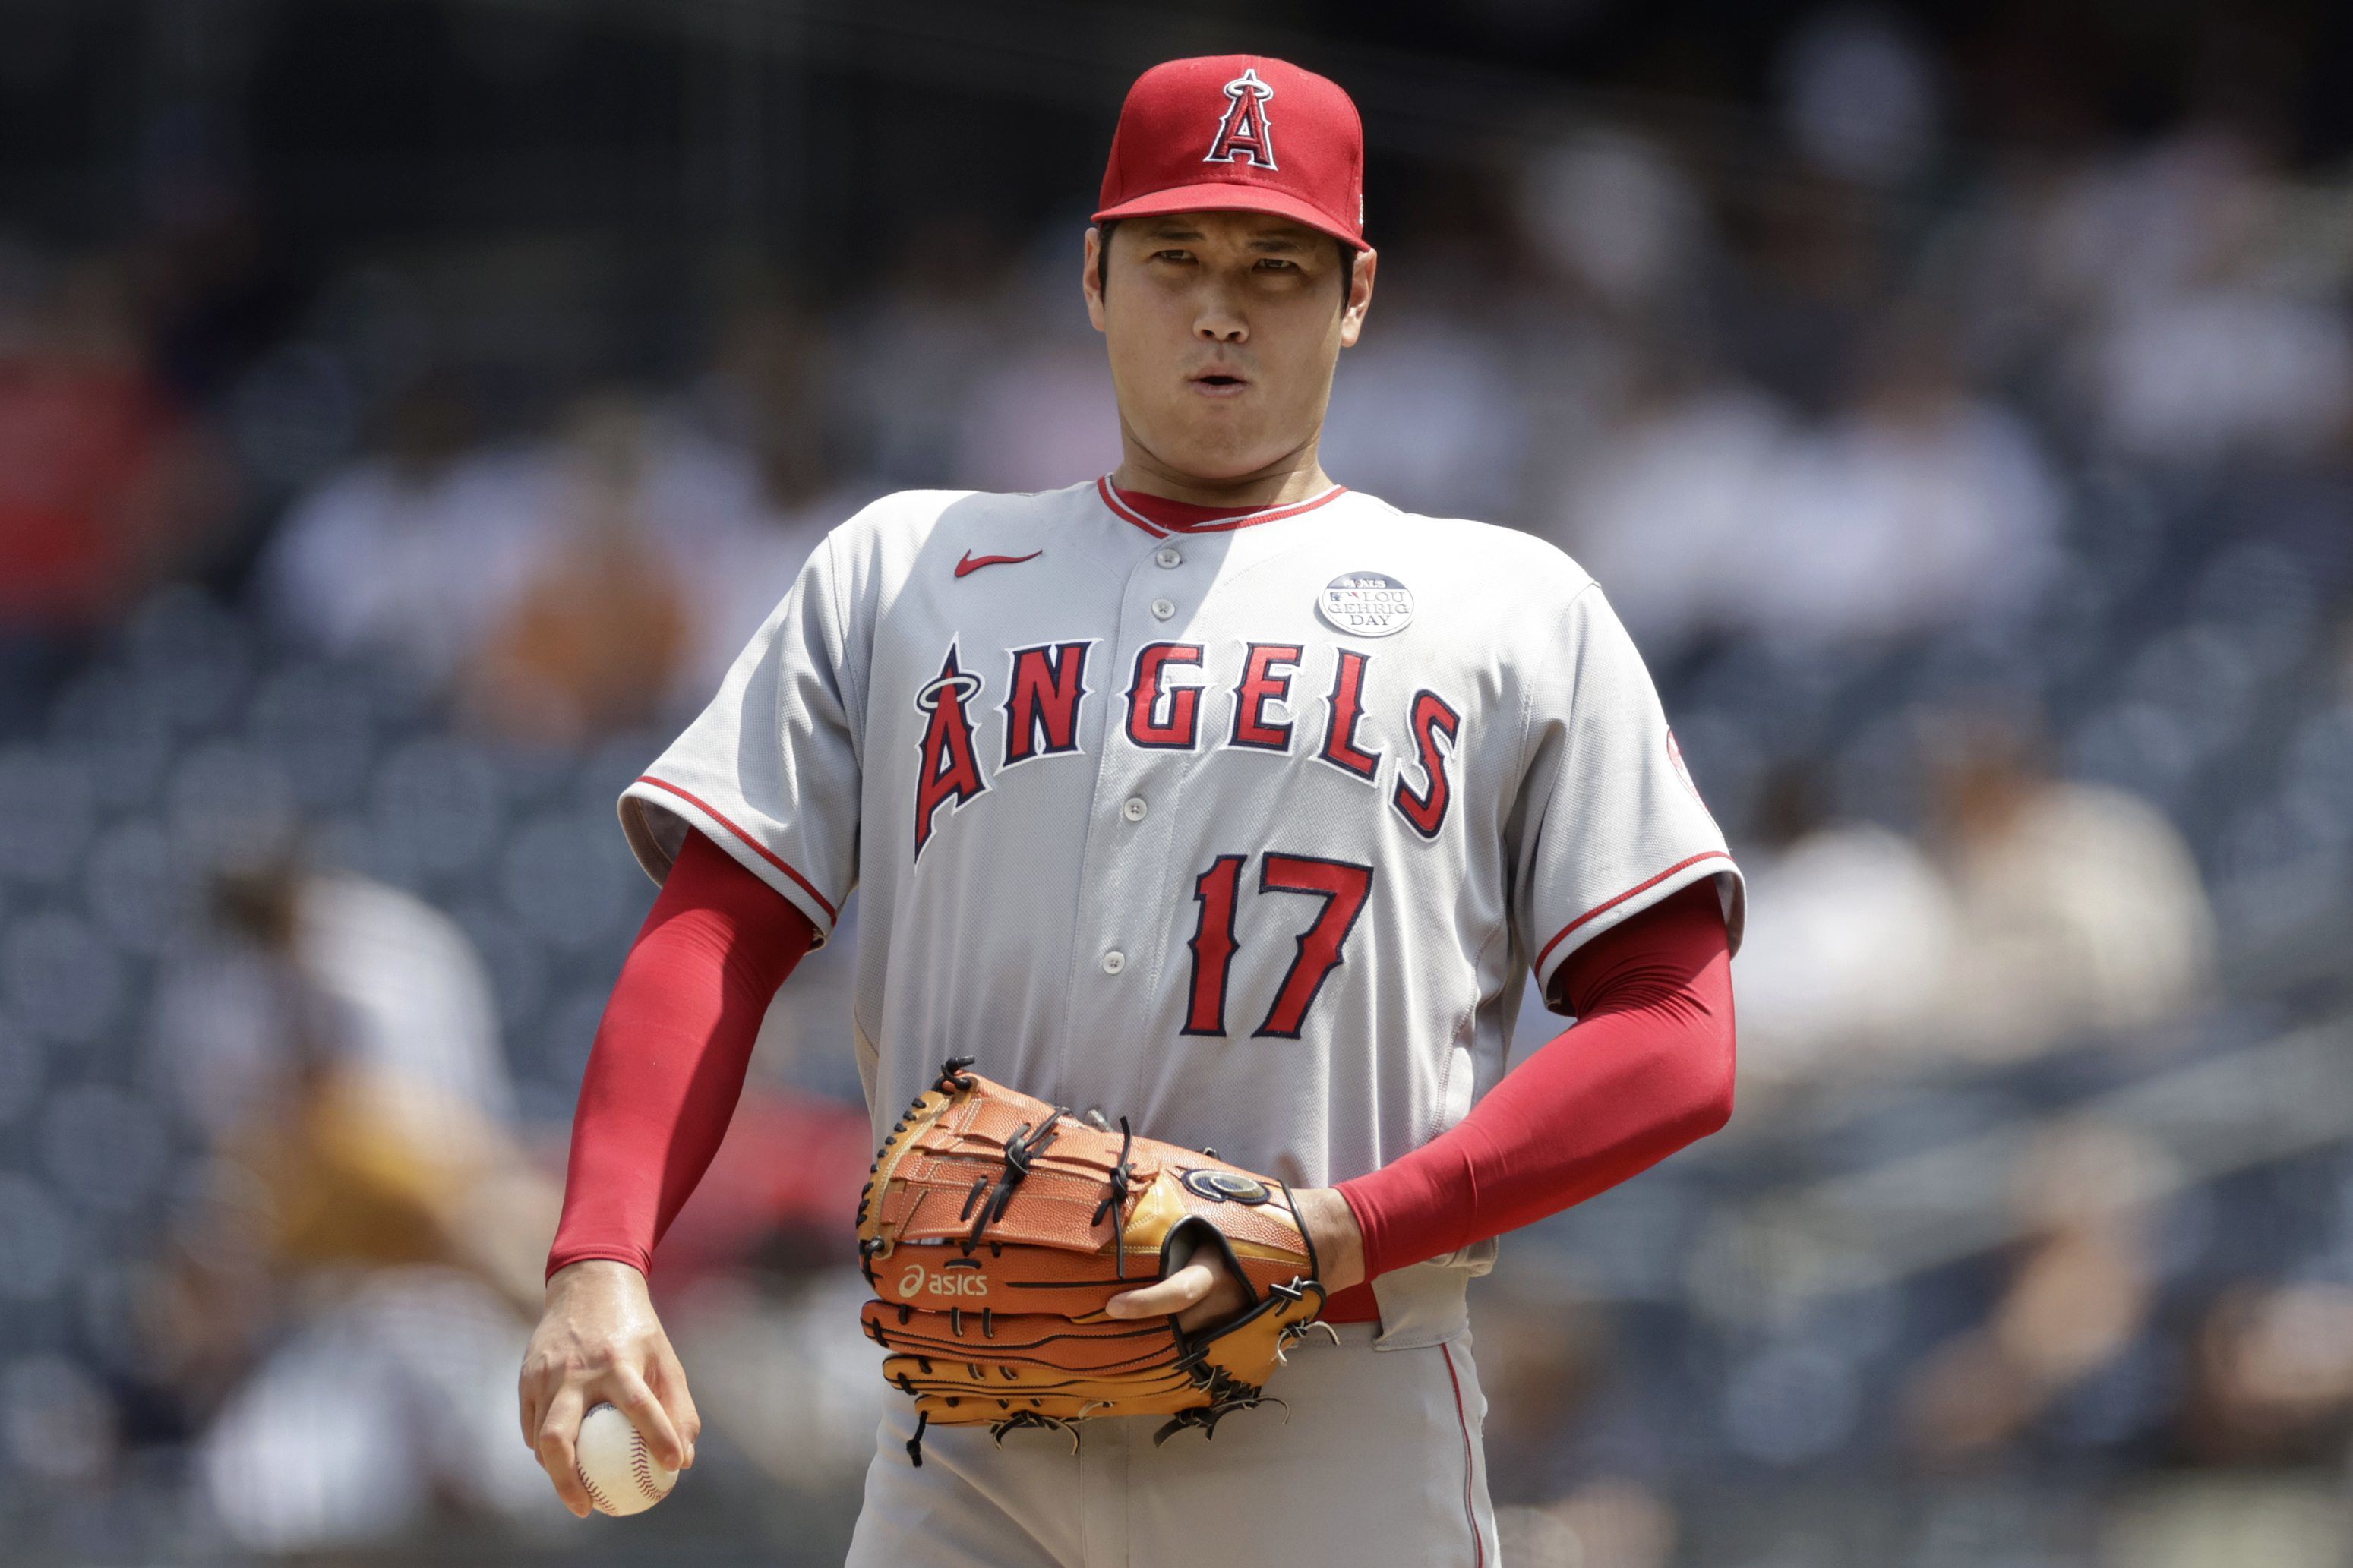 Aaron Judge and Shohei Ohtani give mixed injury updates as Yankees